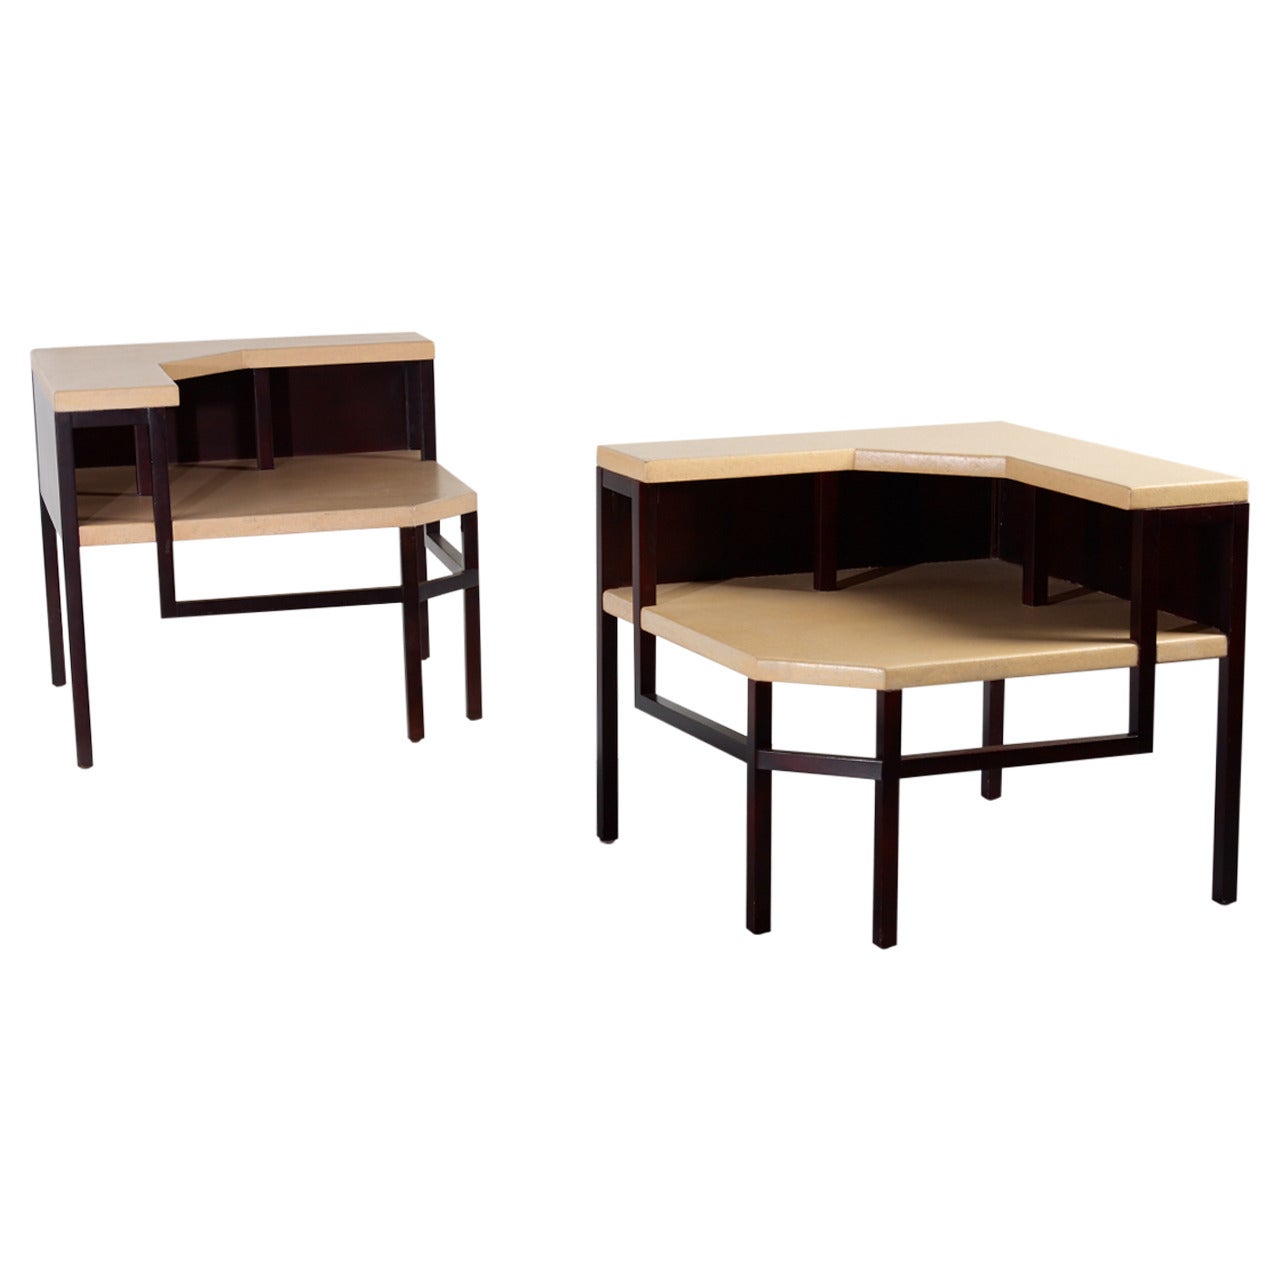 Paul Frankl Corner Tables, Lacquered Cork and Mahogany, 1951